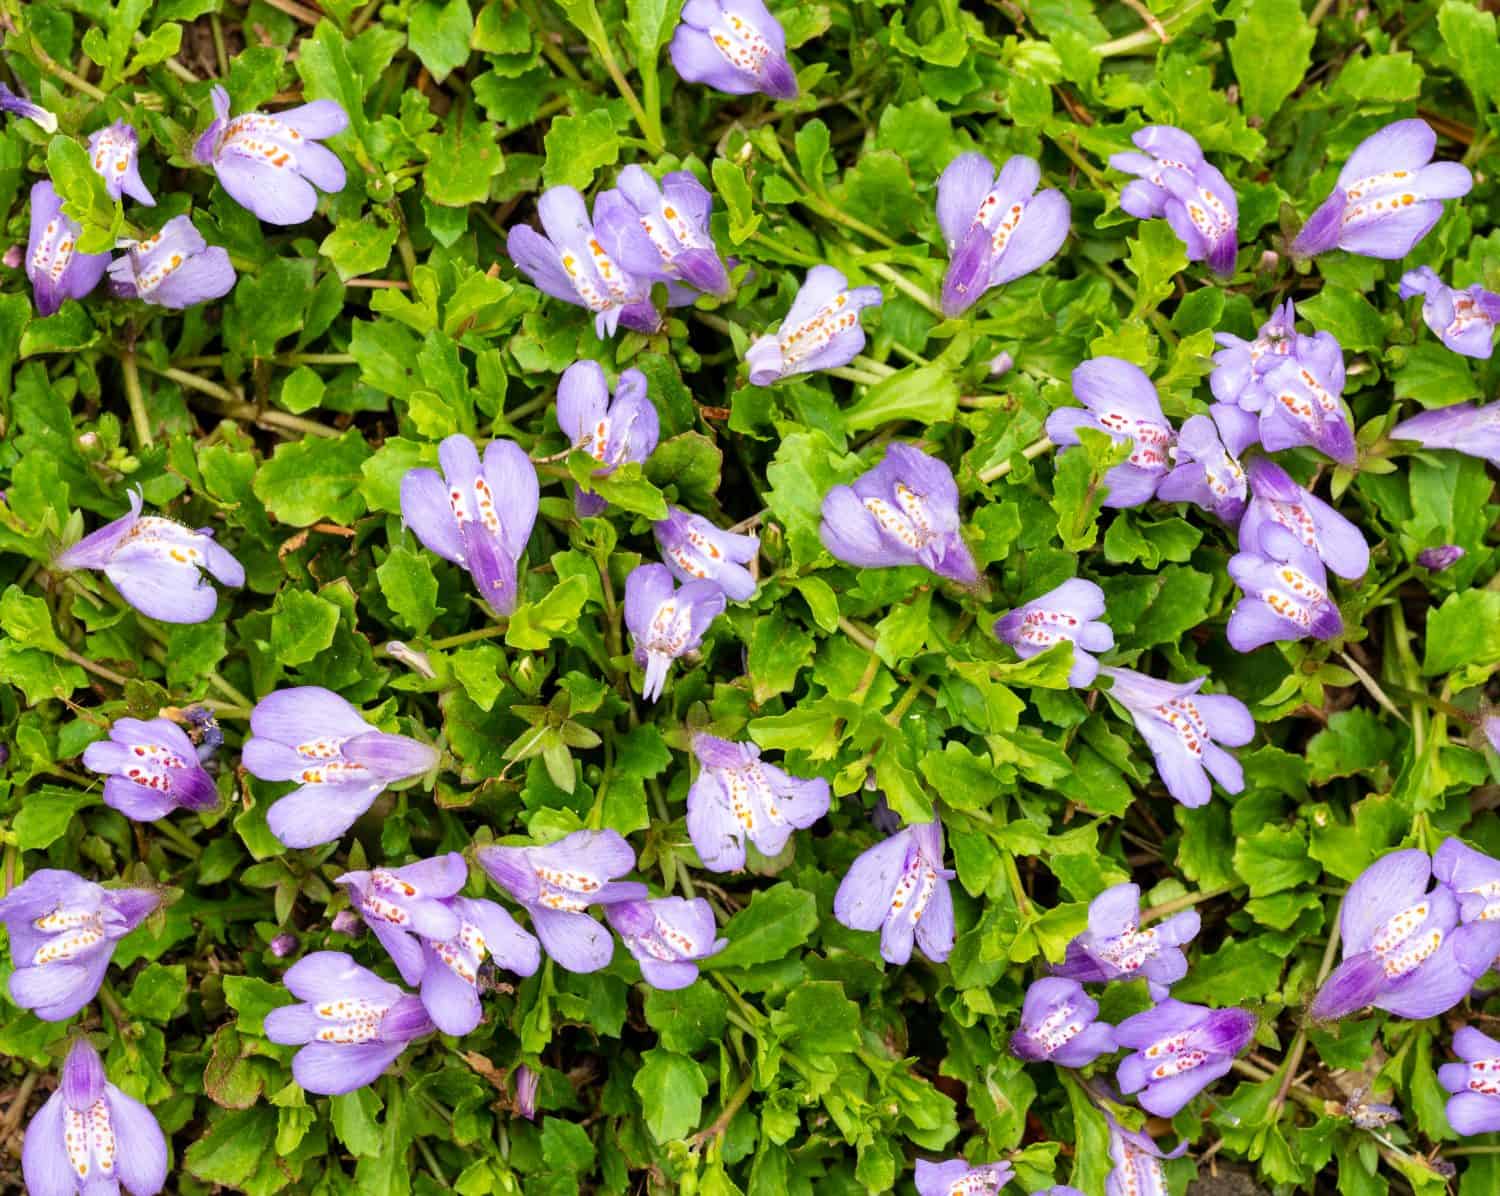 Mazus reptans flowers growing as ground cover in central Virginia in mid-April